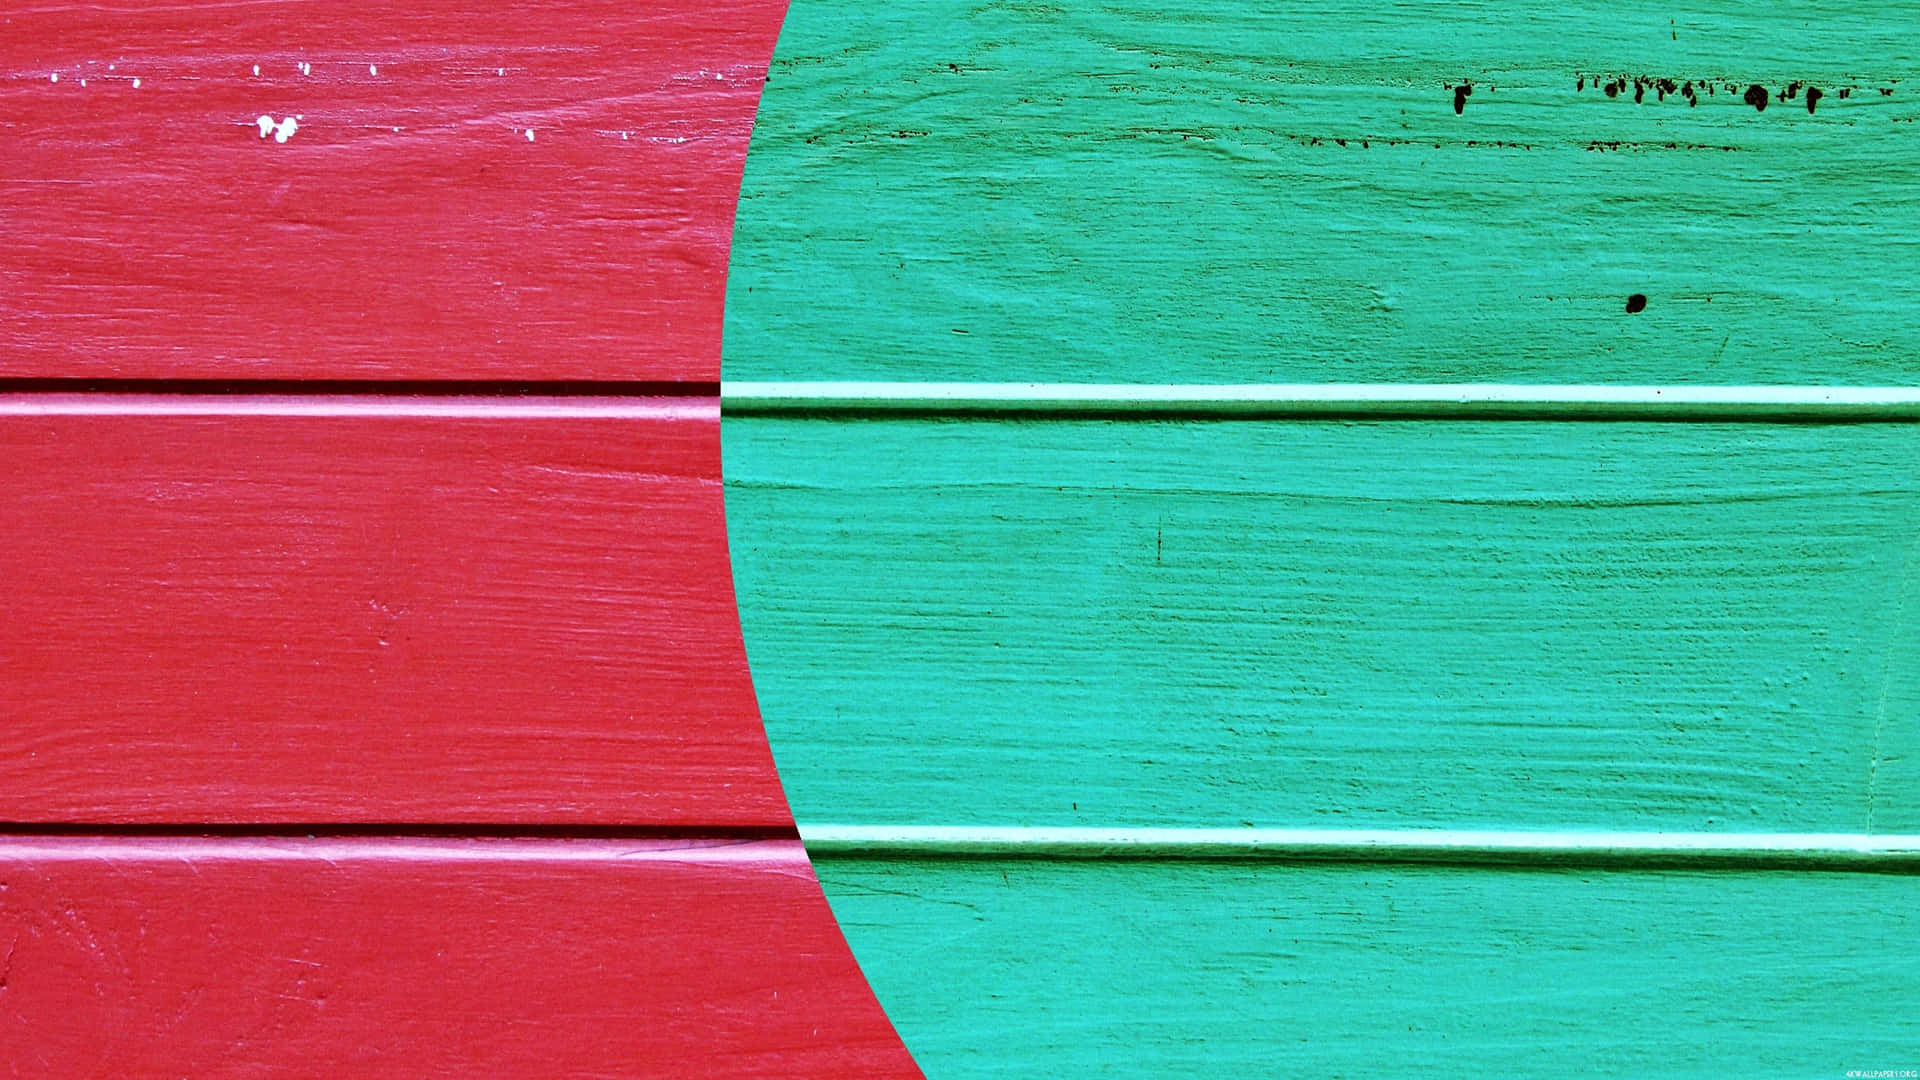 Landscape Red And Green Wood Background